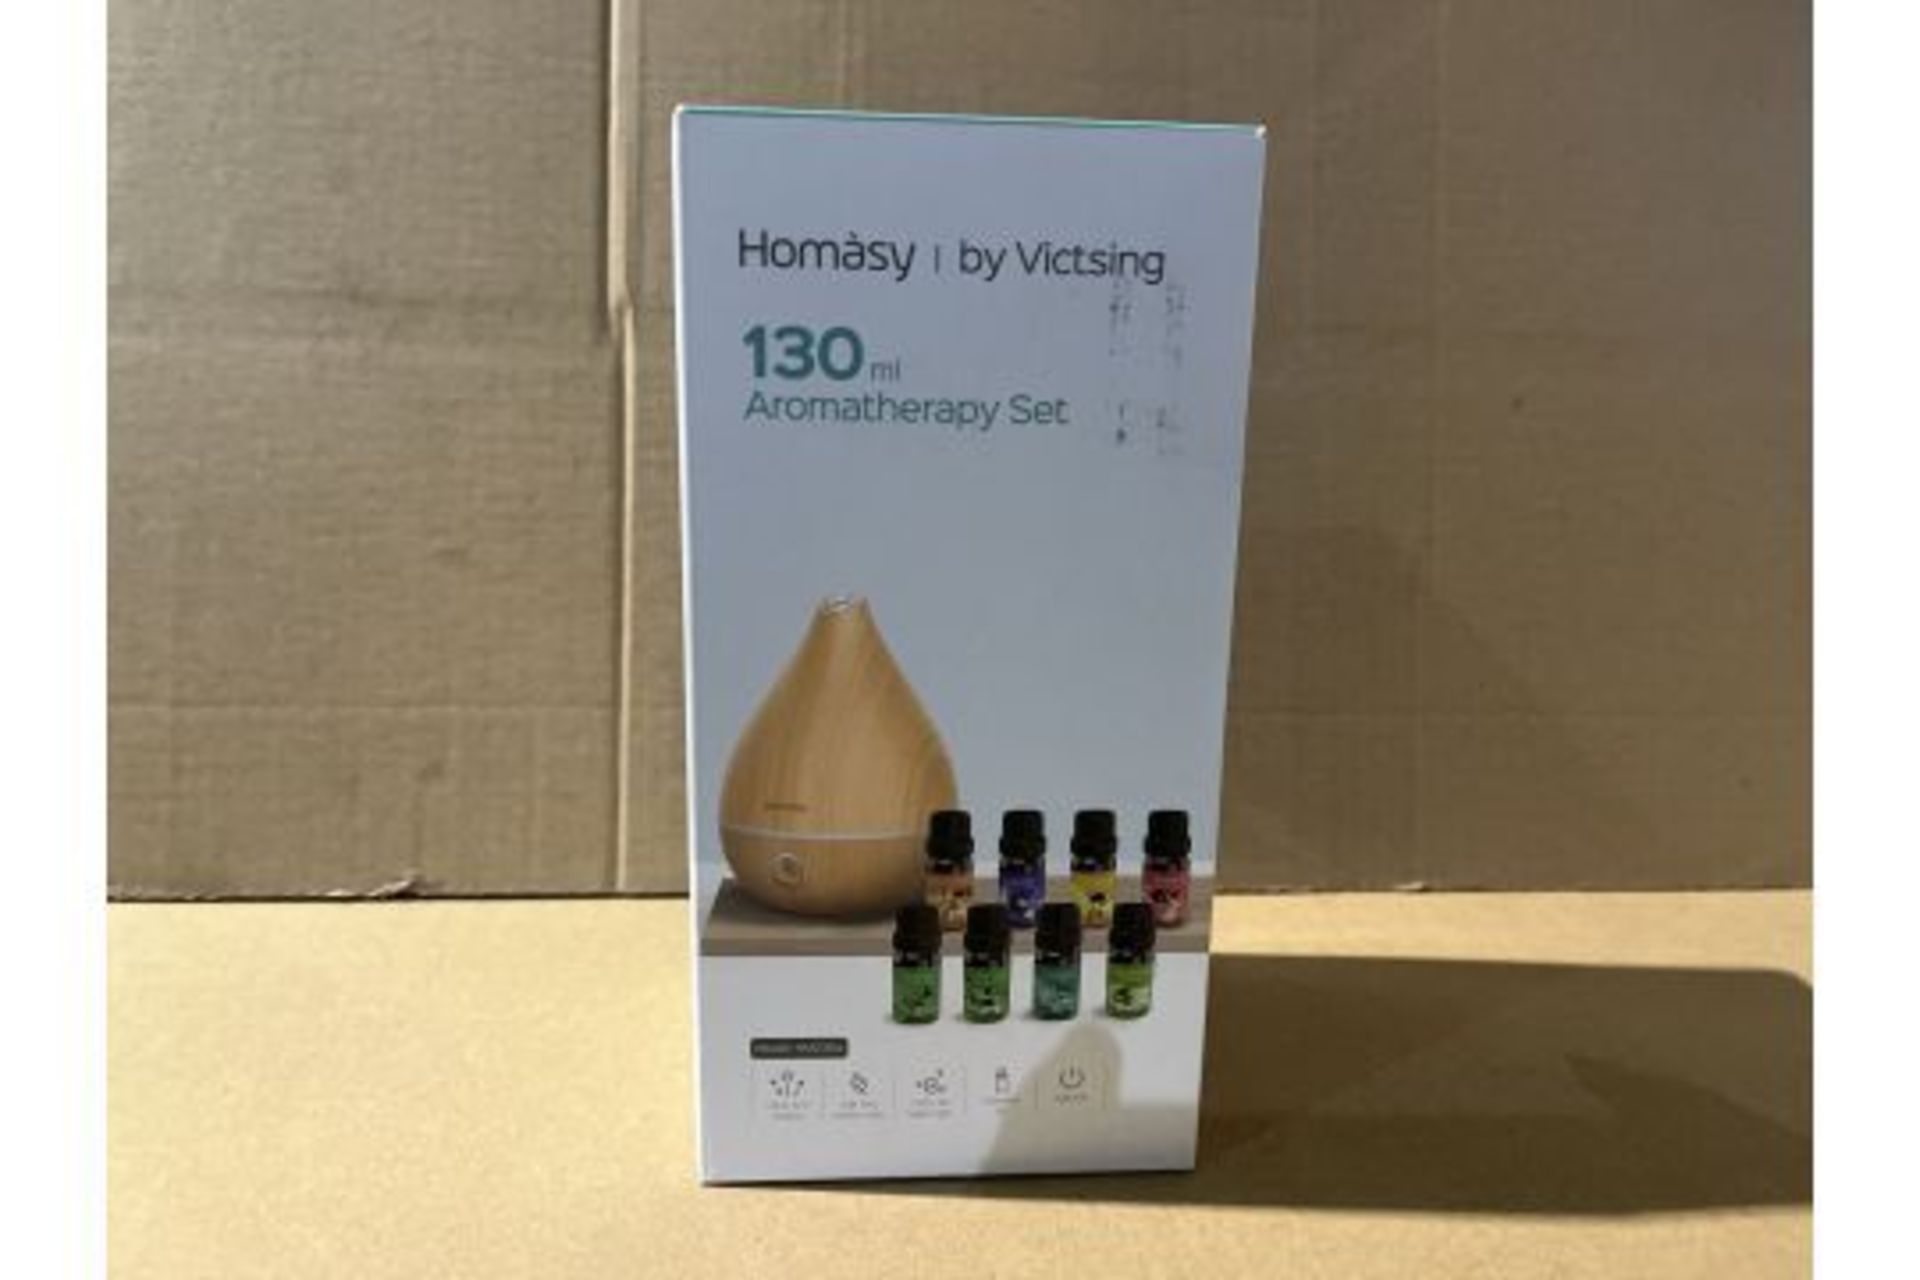 4 X BRAND NEW HOMASY BY VICTSING 130ML AROMATHERAPY SETS R15-11